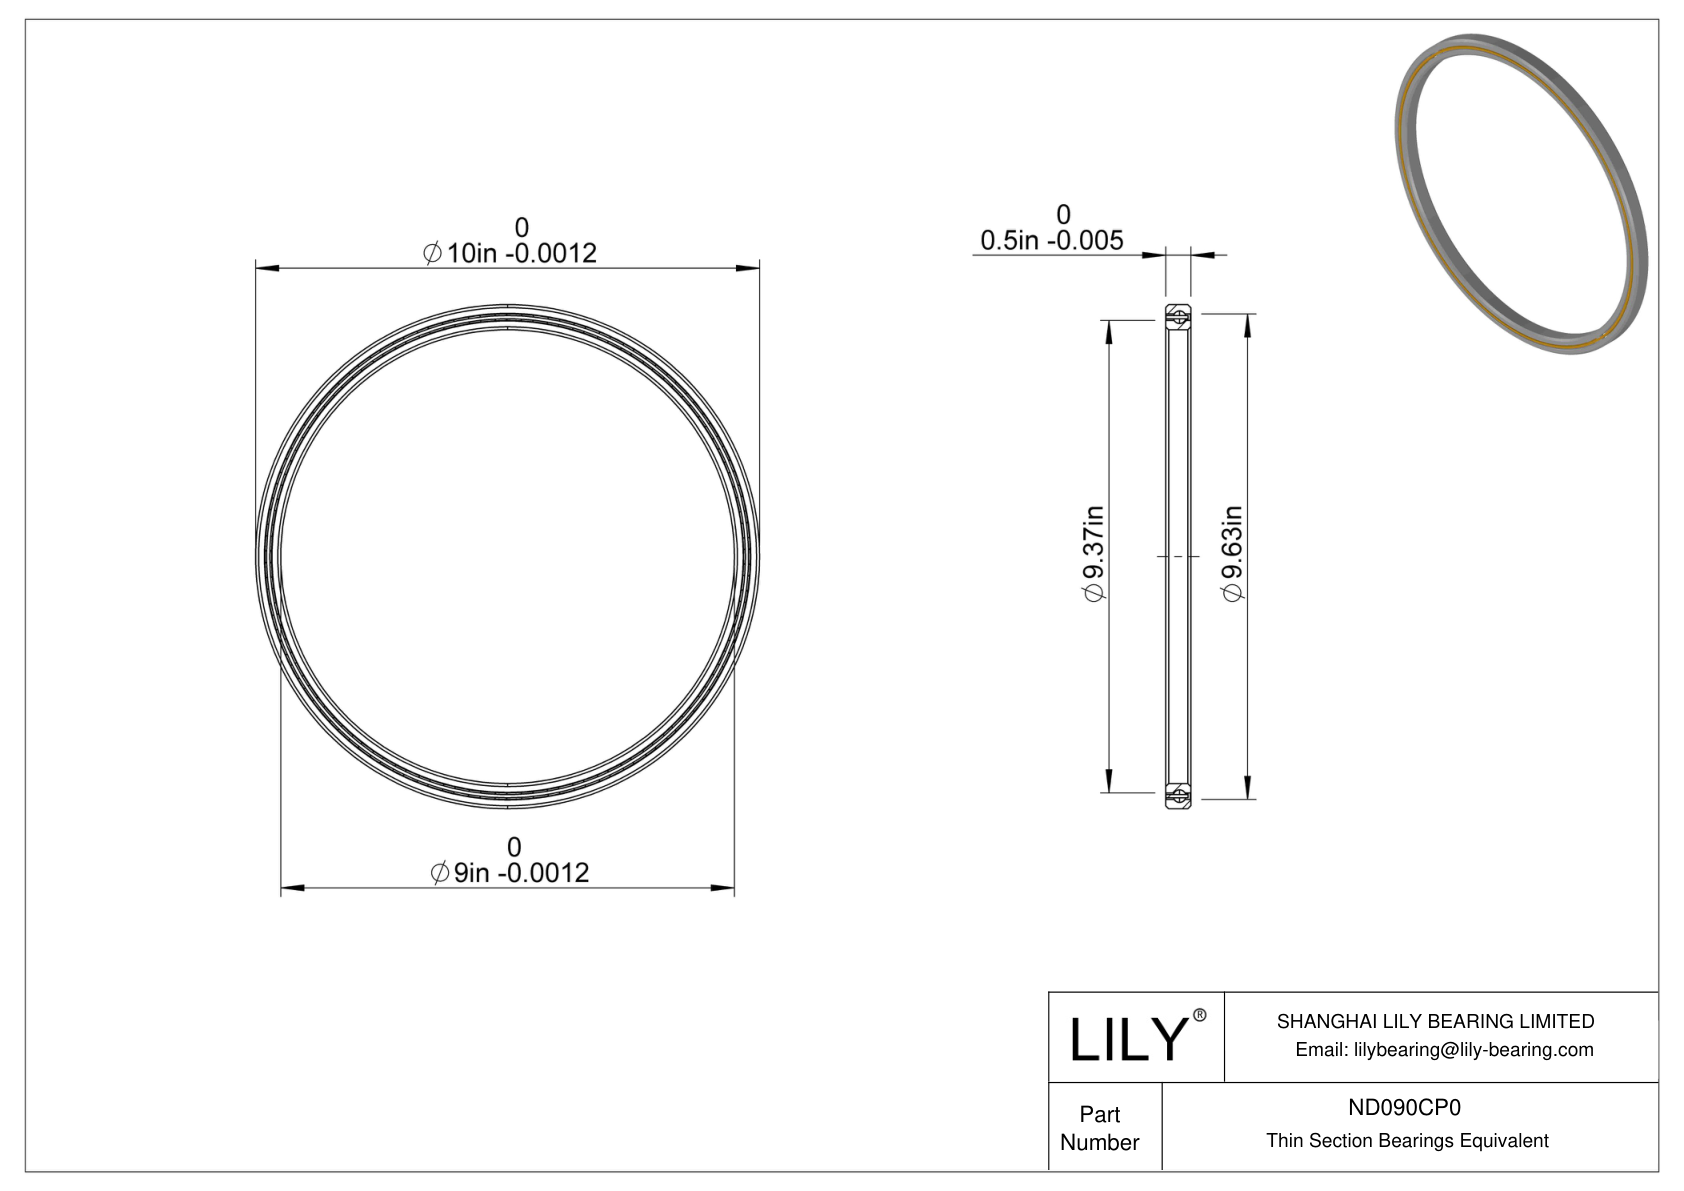 ND090CP0 Constant Section (CS) Bearings cad drawing